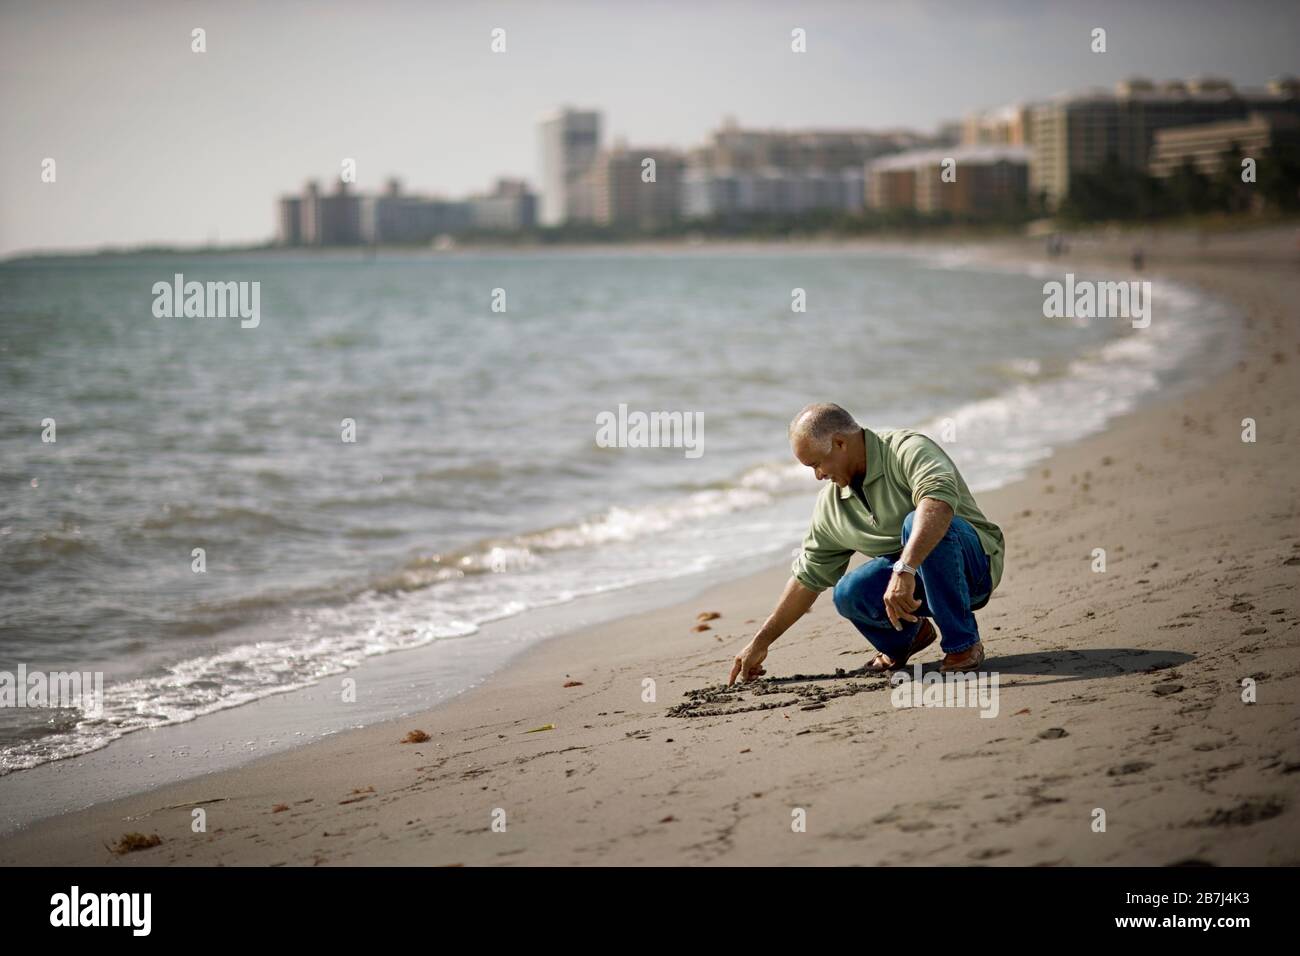 Mature adult man drawing in the sand on a beach Stock Photo - Alamy